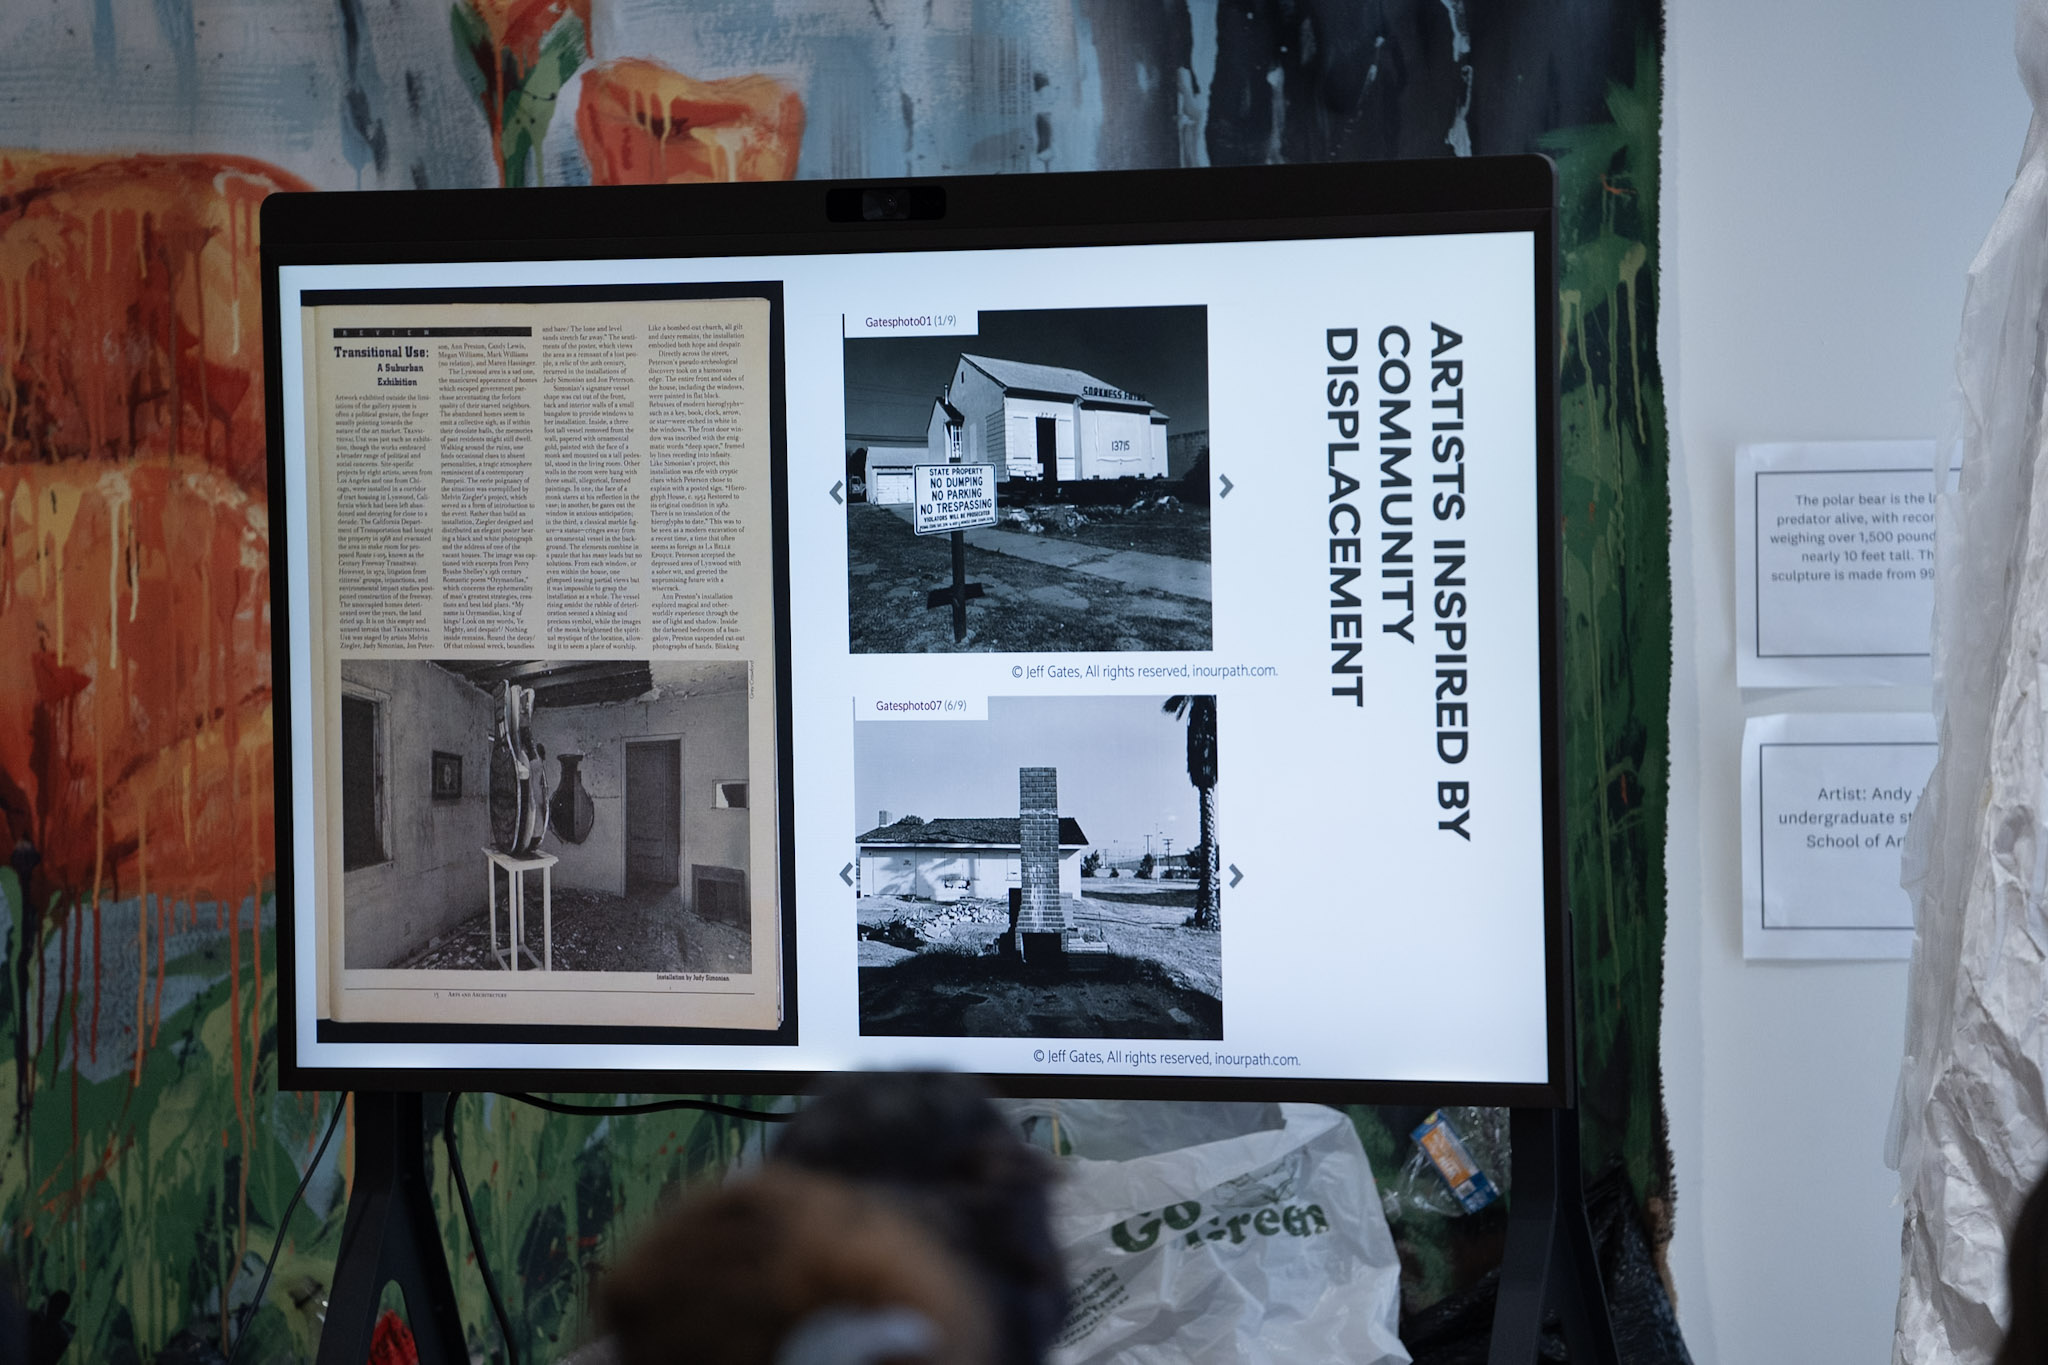 a monitor shows a slide titled "Artists Inspired by Community Displacement" displays newspaper clippings and photographs related to the construction of Los Angeles's Century Freeway